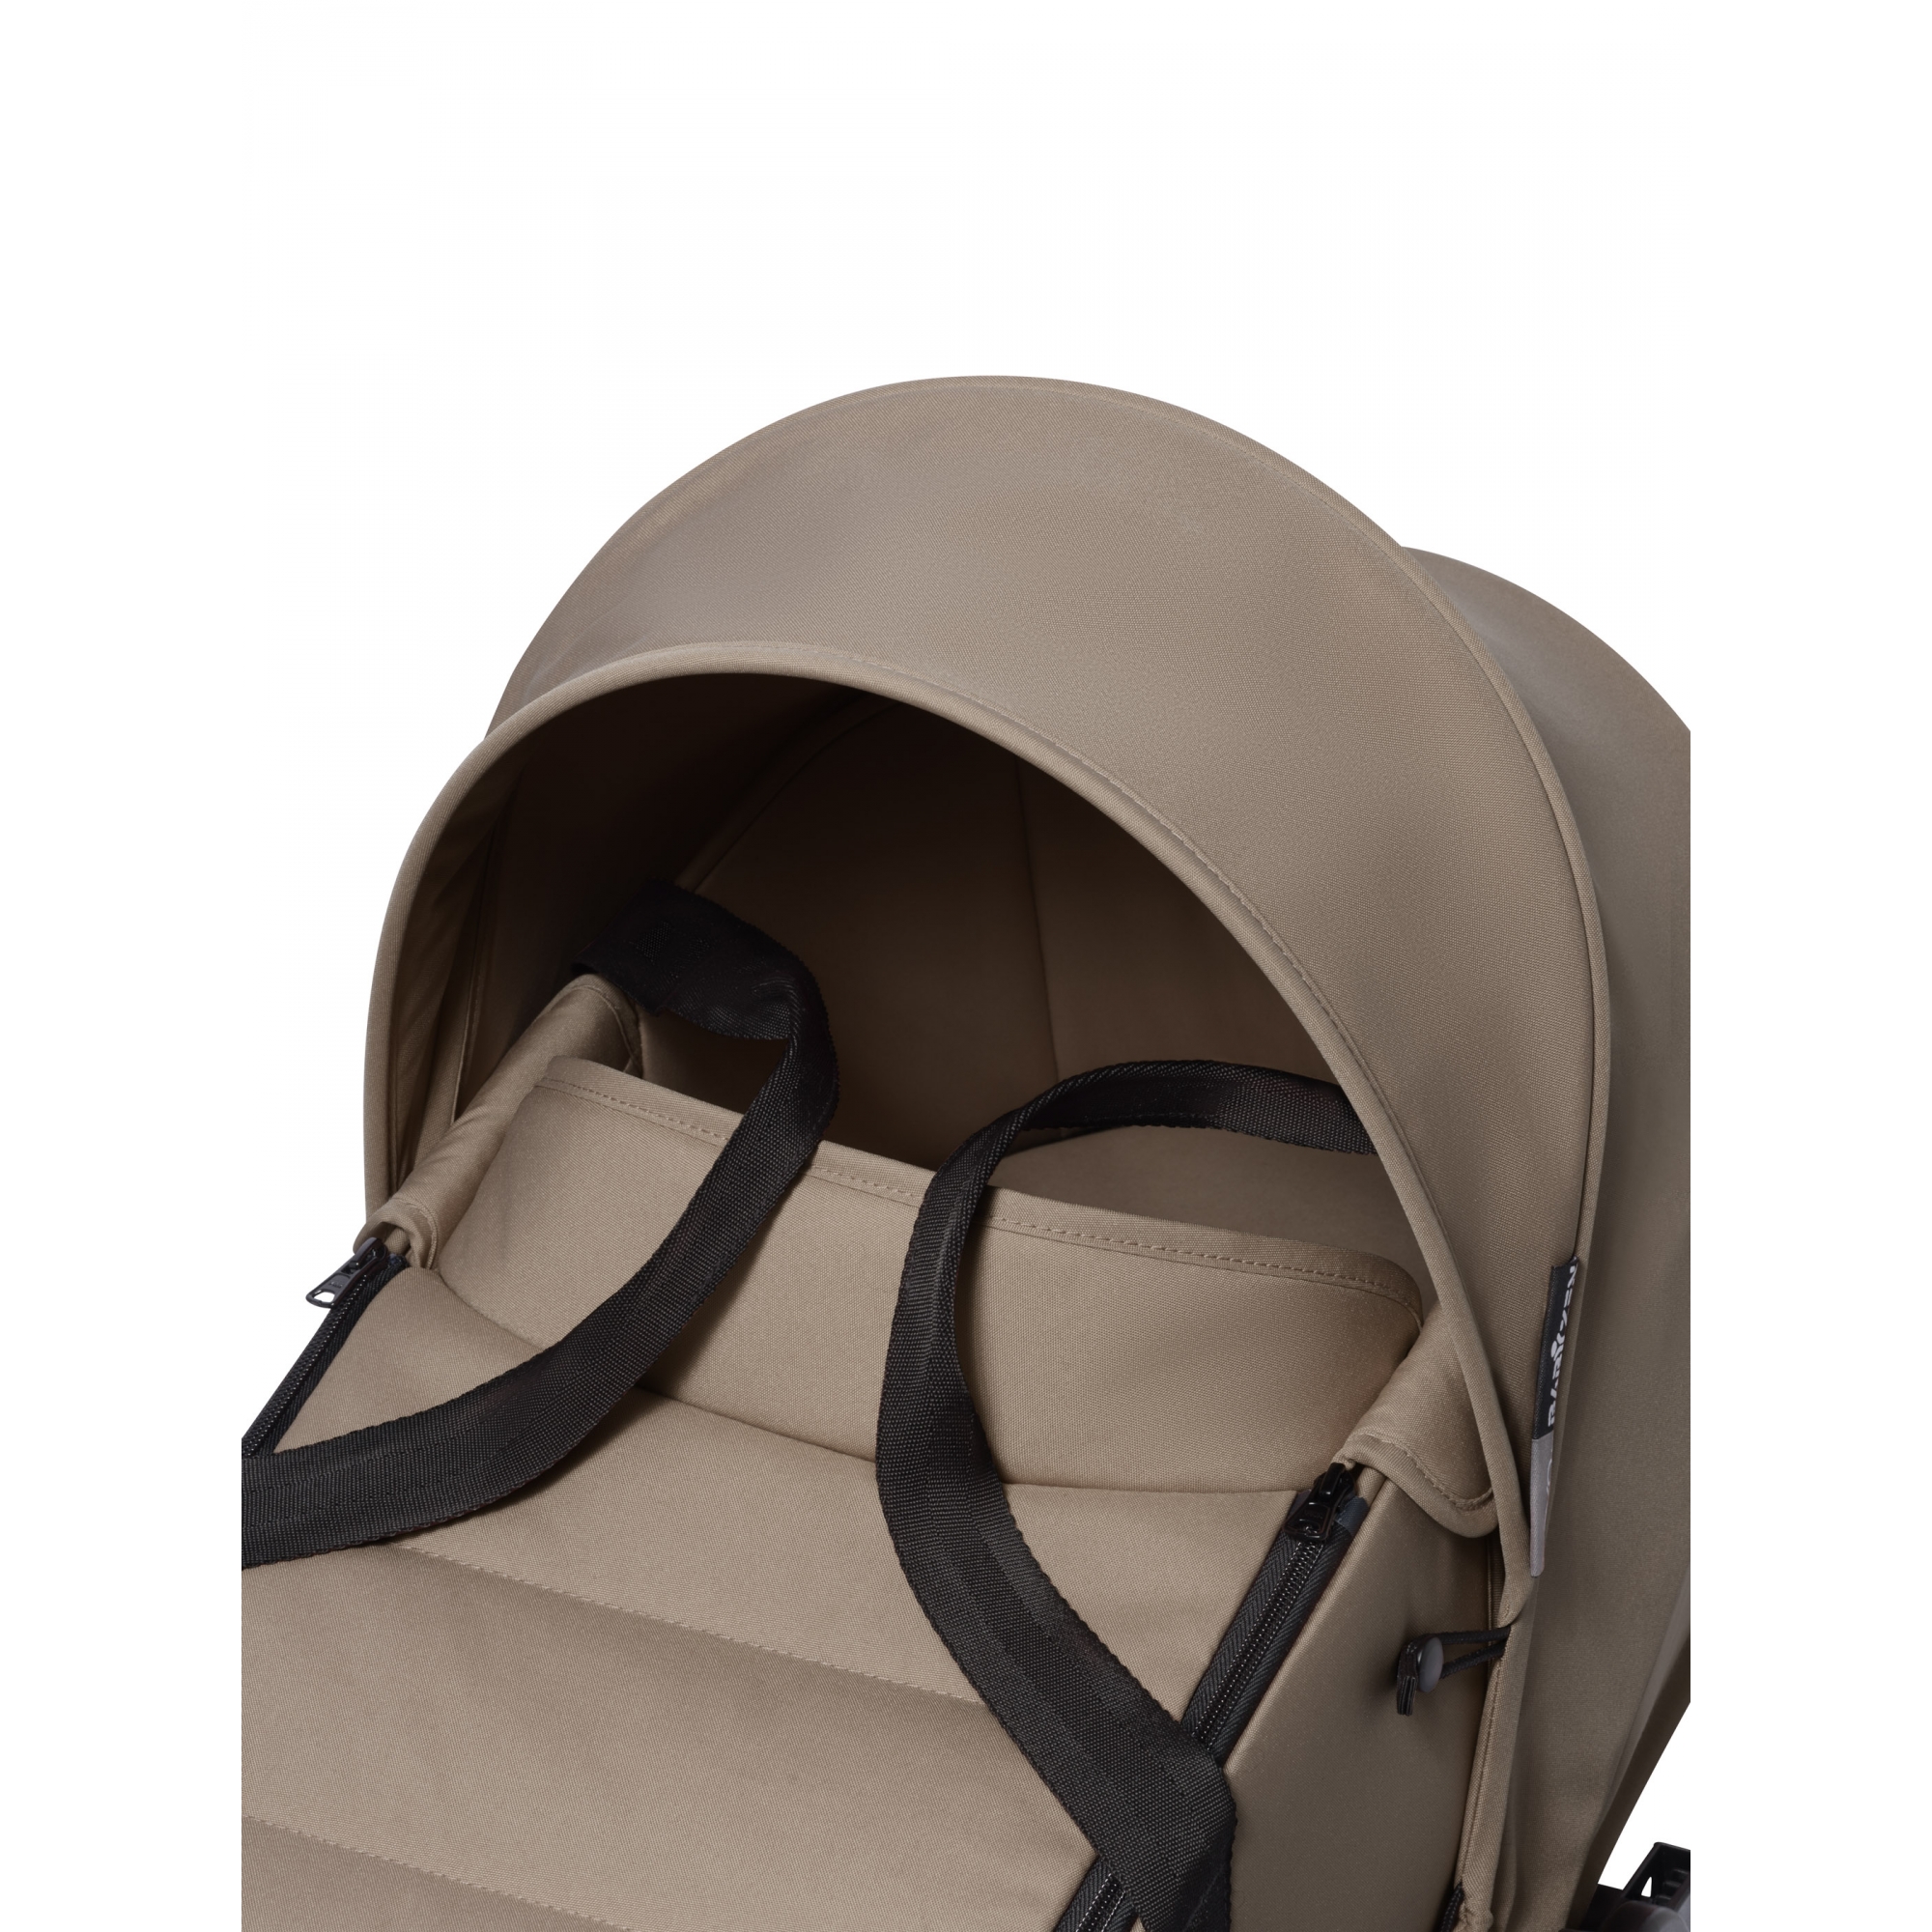 Pack poussette Duo YOYO² pack 6+ et YOYO car seat by Besafe - Cadre Noir -  Taupe - Made in Bébé